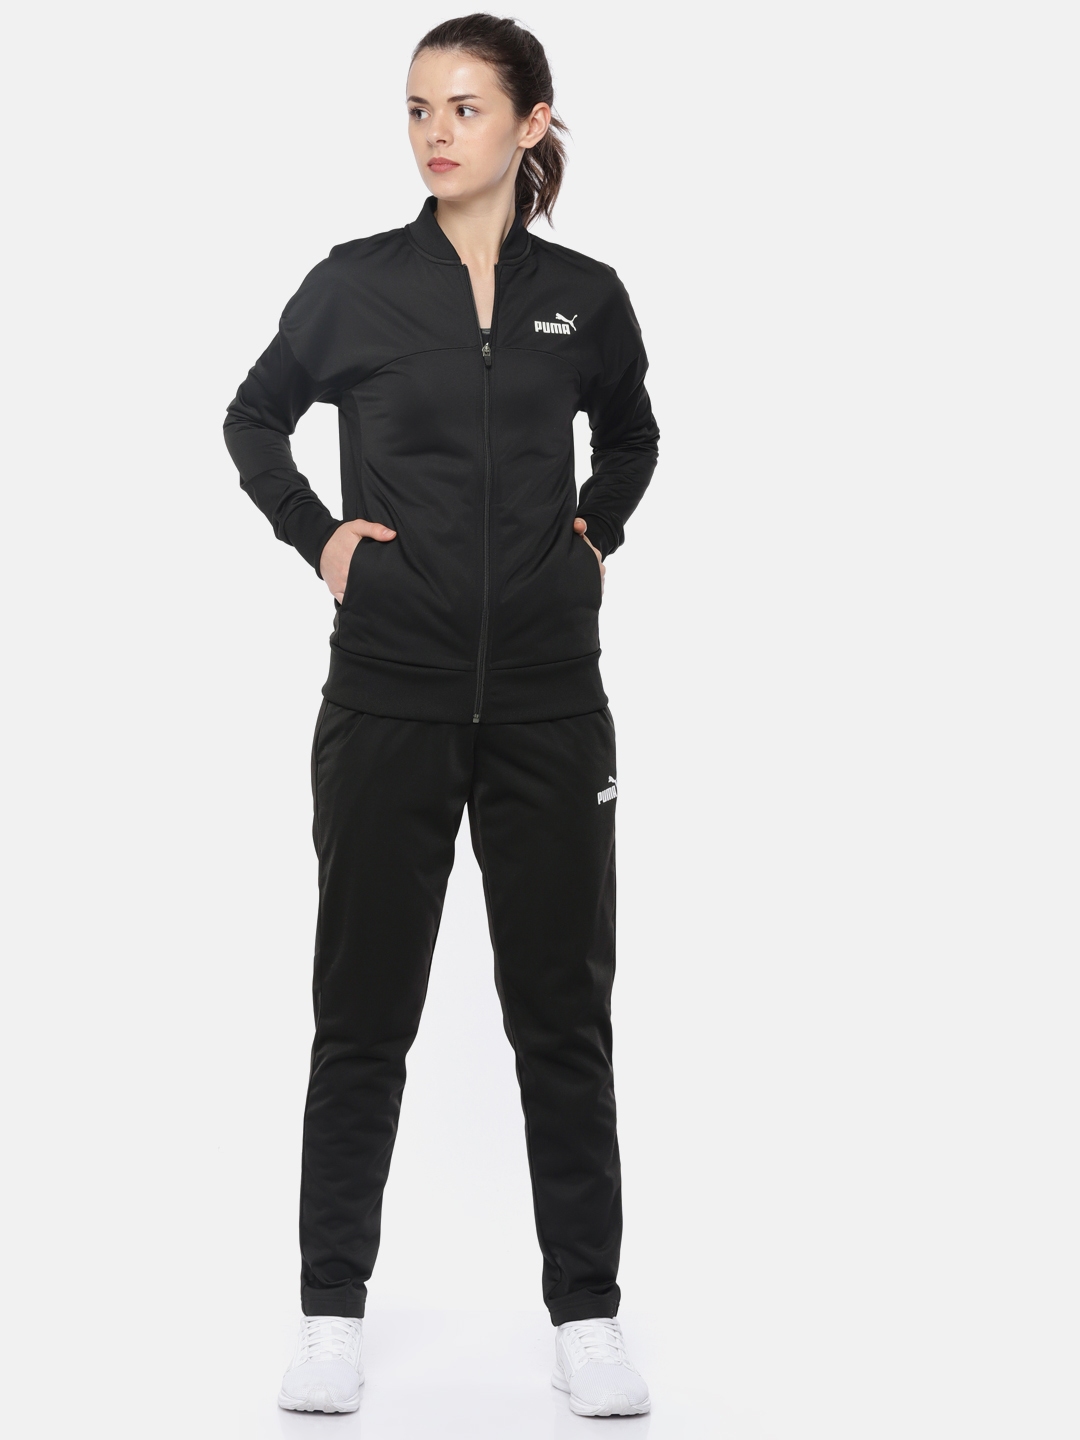 Buy Puma Women Balck Solid Classic Tricot Suit - Tracksuits for Women 7143765